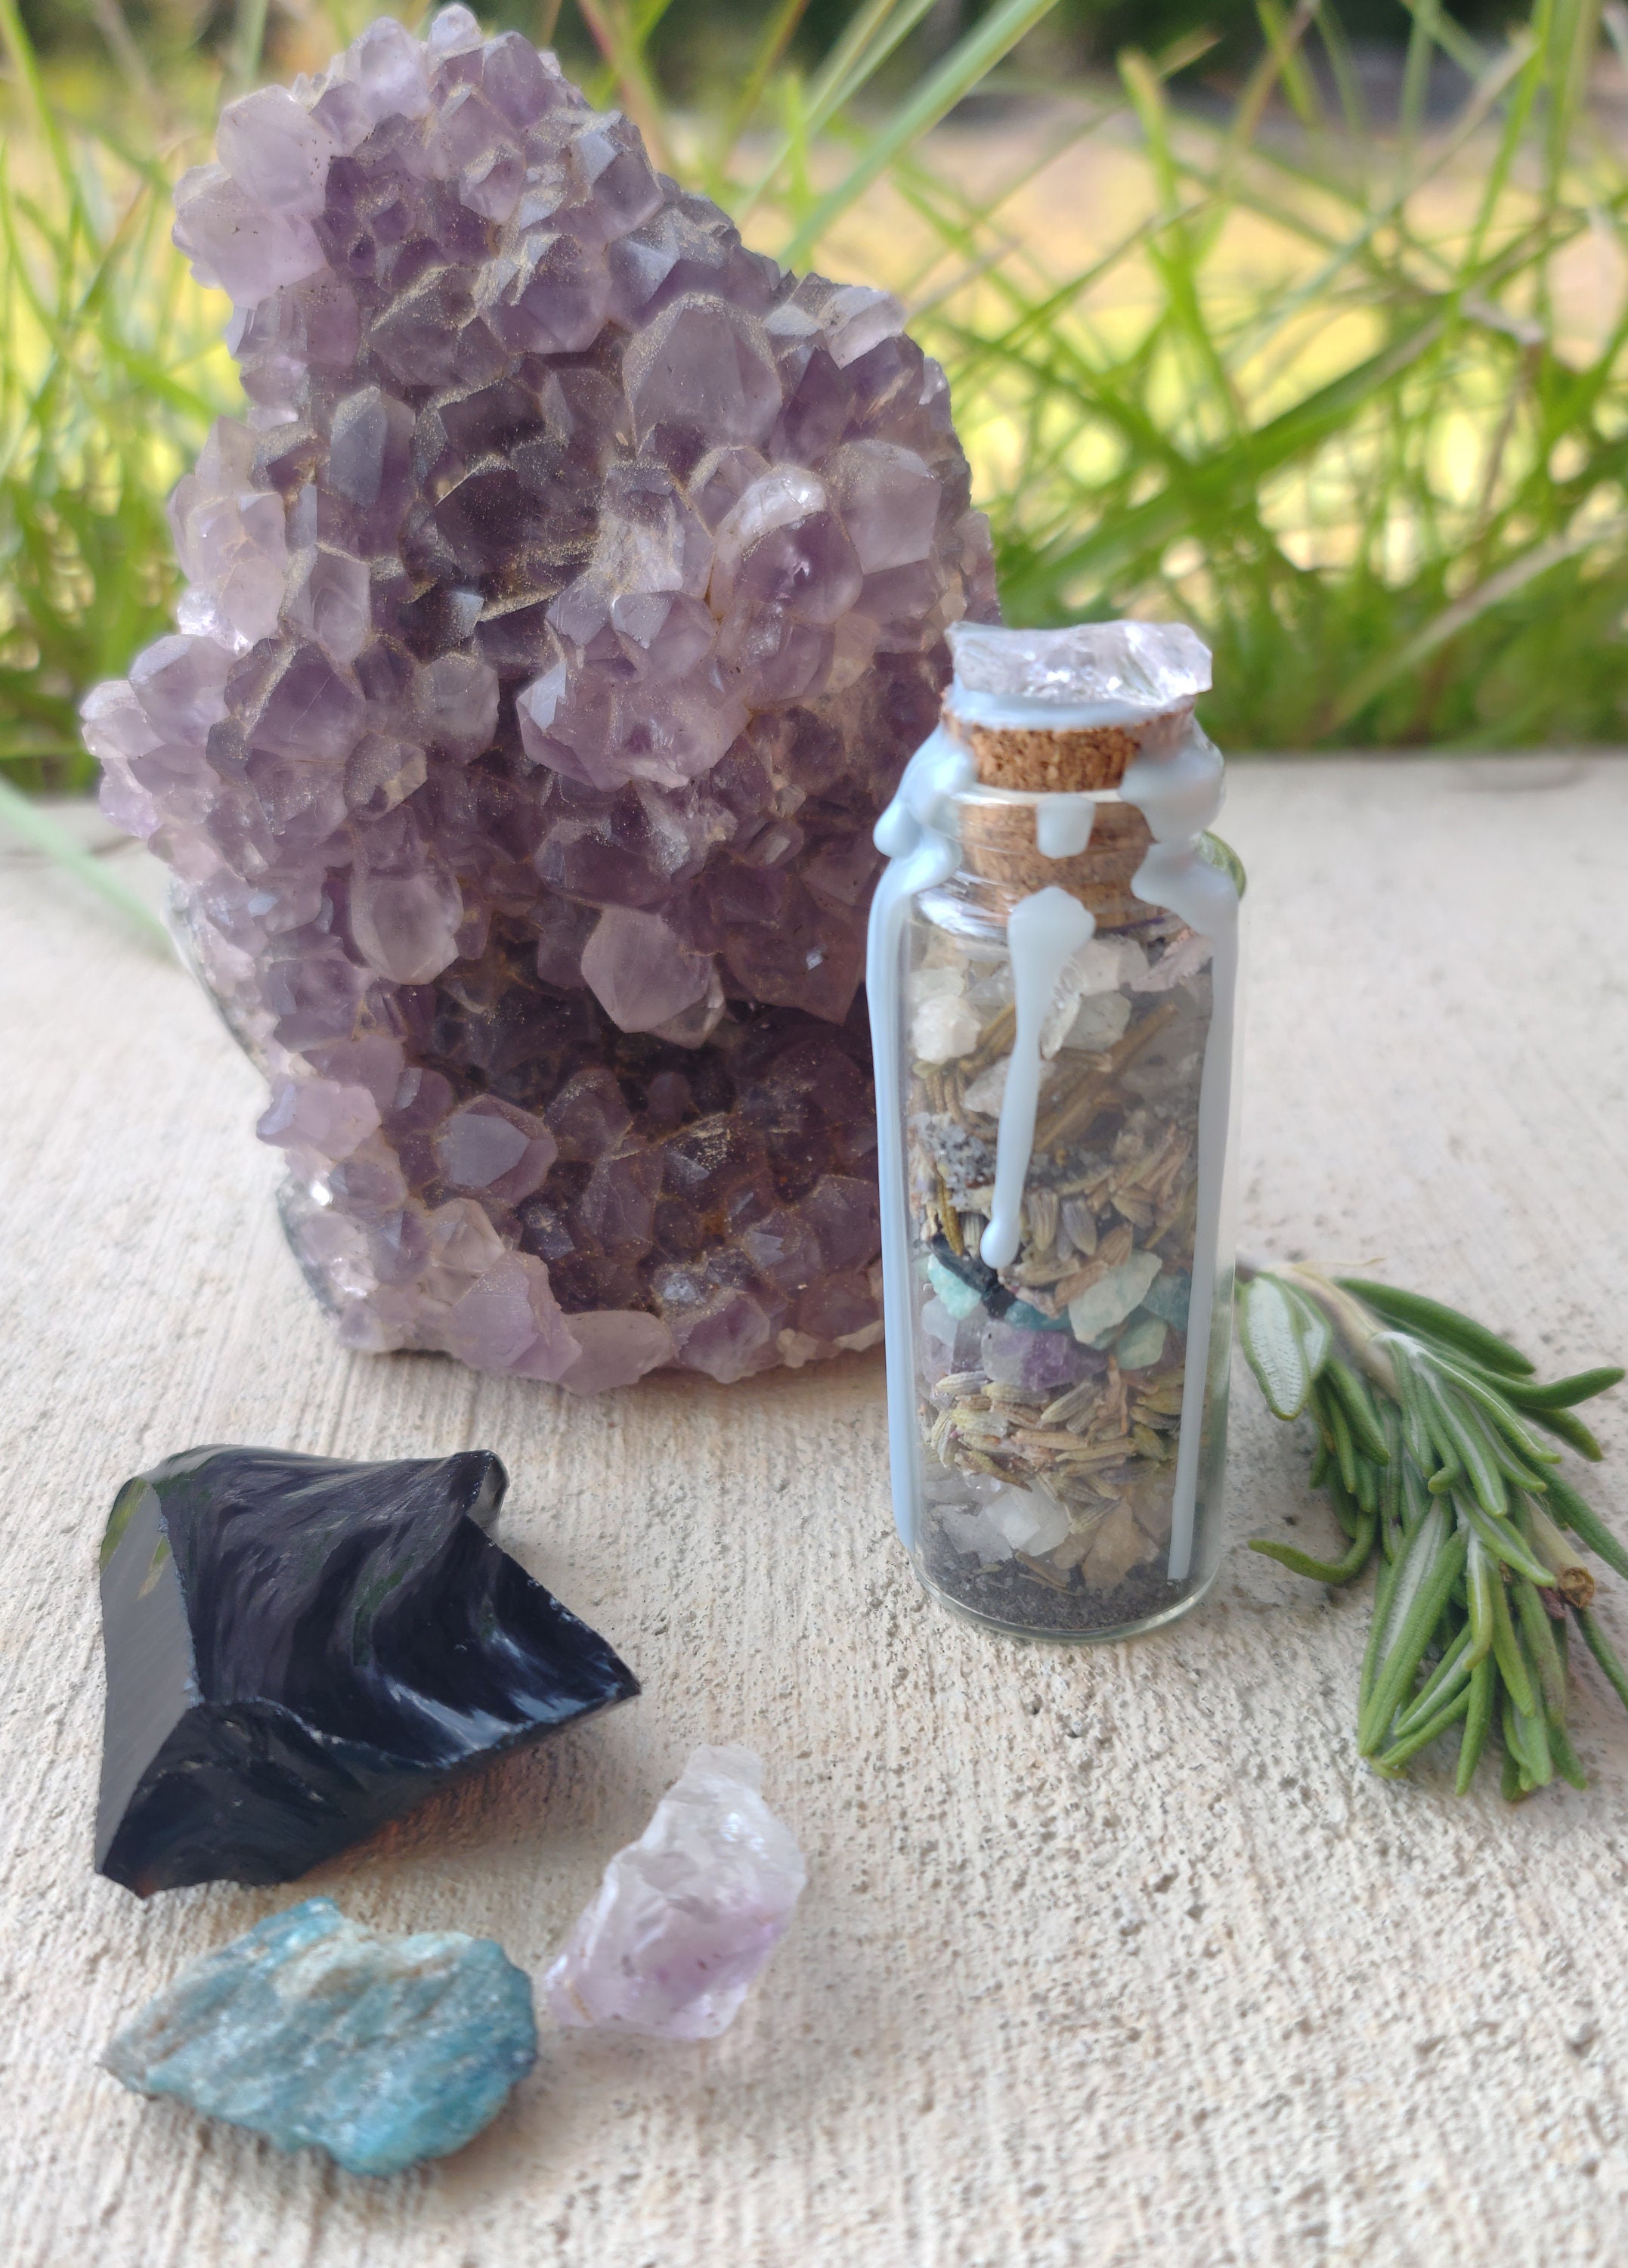 Self Love Spell Jar With Organic Herbs, Tumbled Crystal Chips, Intended to  Bring Self Love and Happiness, Self Love Charm, Crystal Gems 